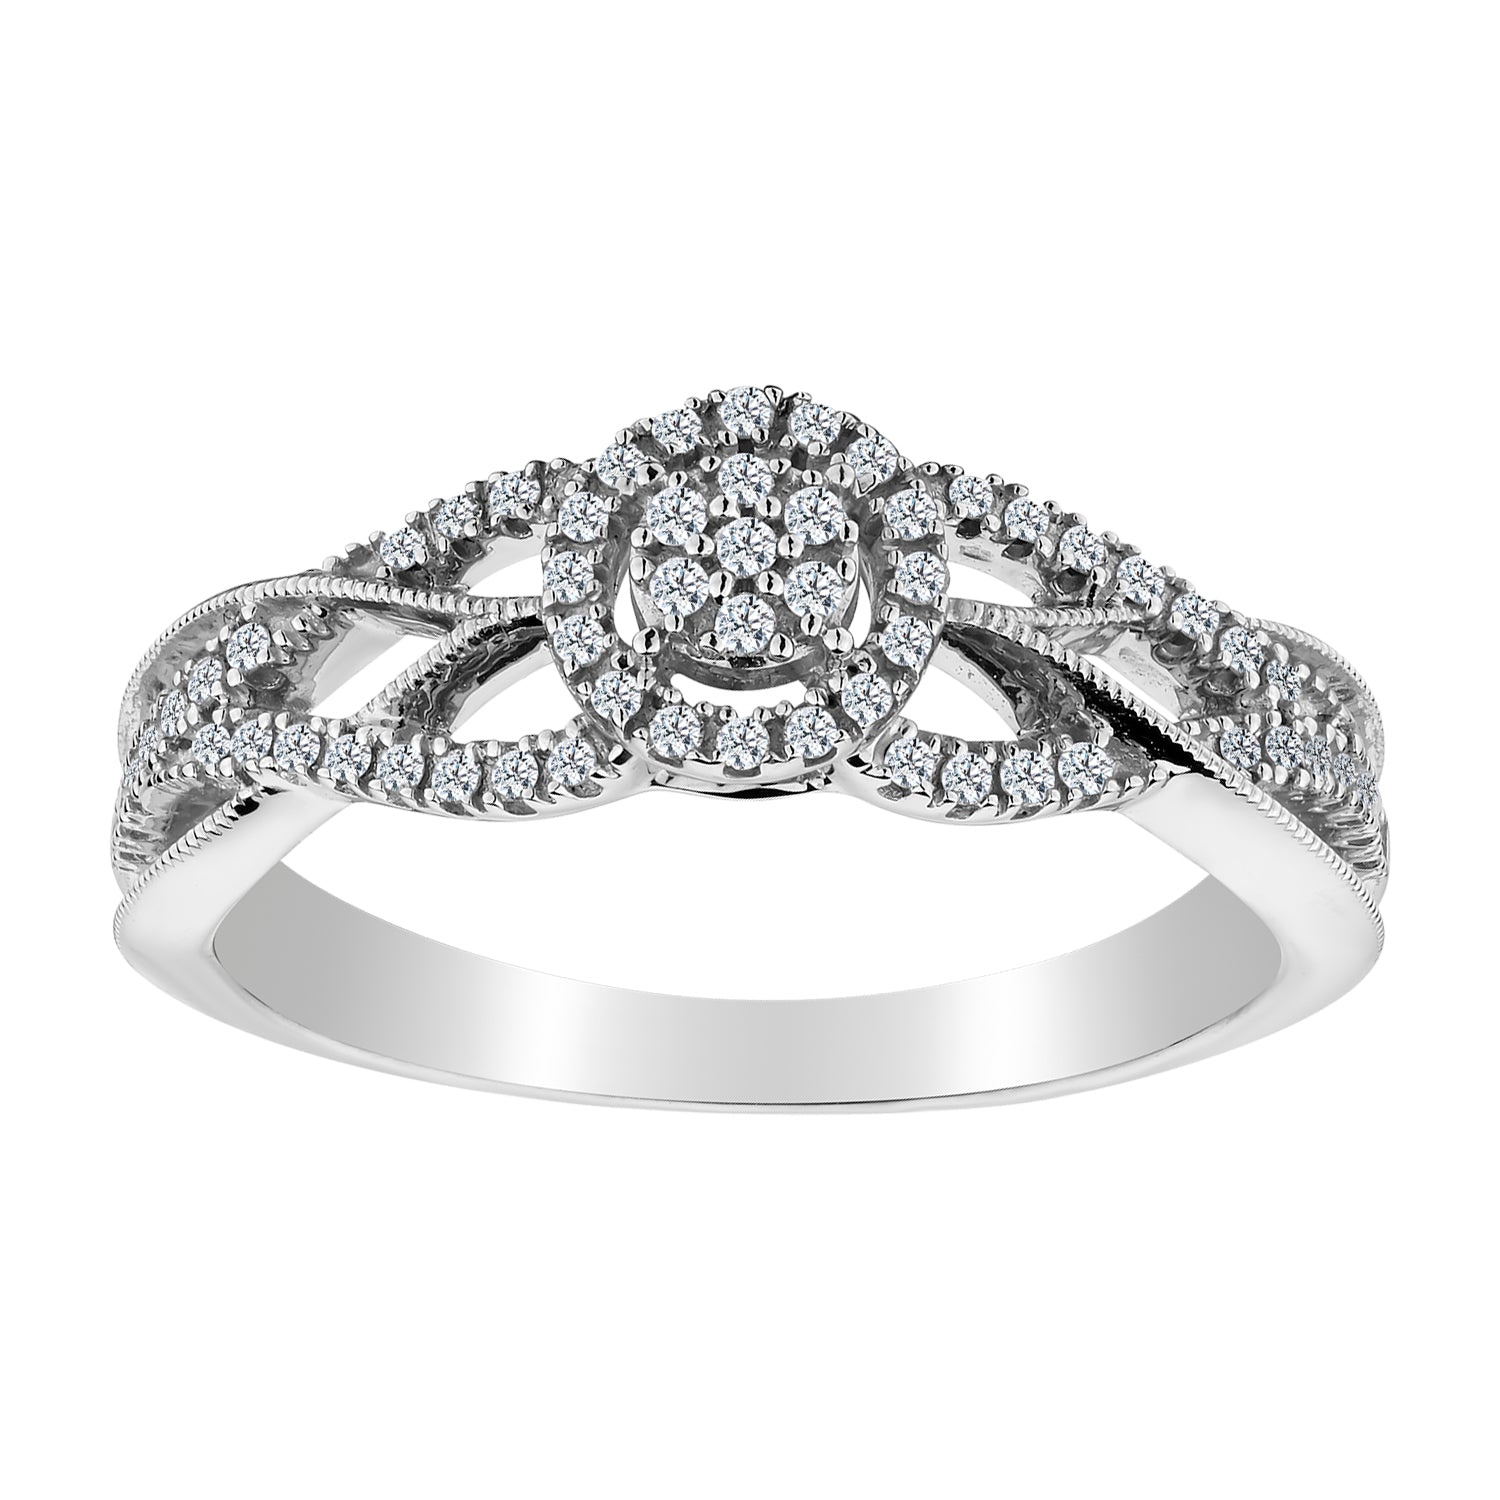 .20 Carat Diamond Pave Ring,  10kt White Gold. Griffin Jewellery Designs